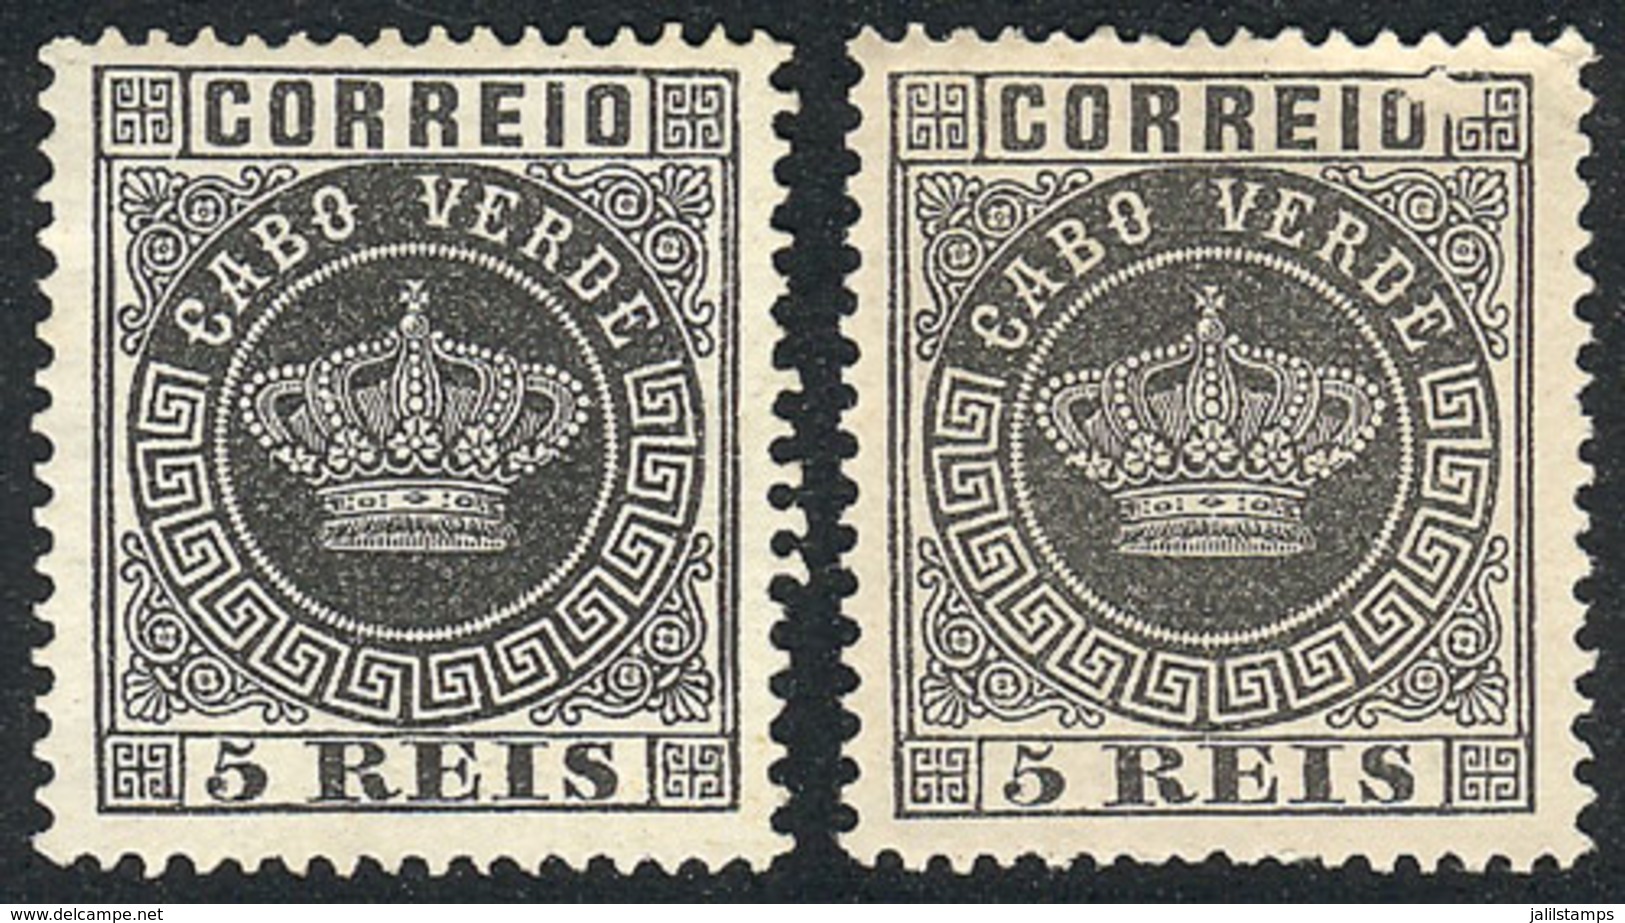 CAPE VERDE: Sc.1, 2 Examples Mint Without Gum, One With VARIETY: Printing Flaw Over The O Of "CORREIO", Interesting!" - Kaapverdische Eilanden